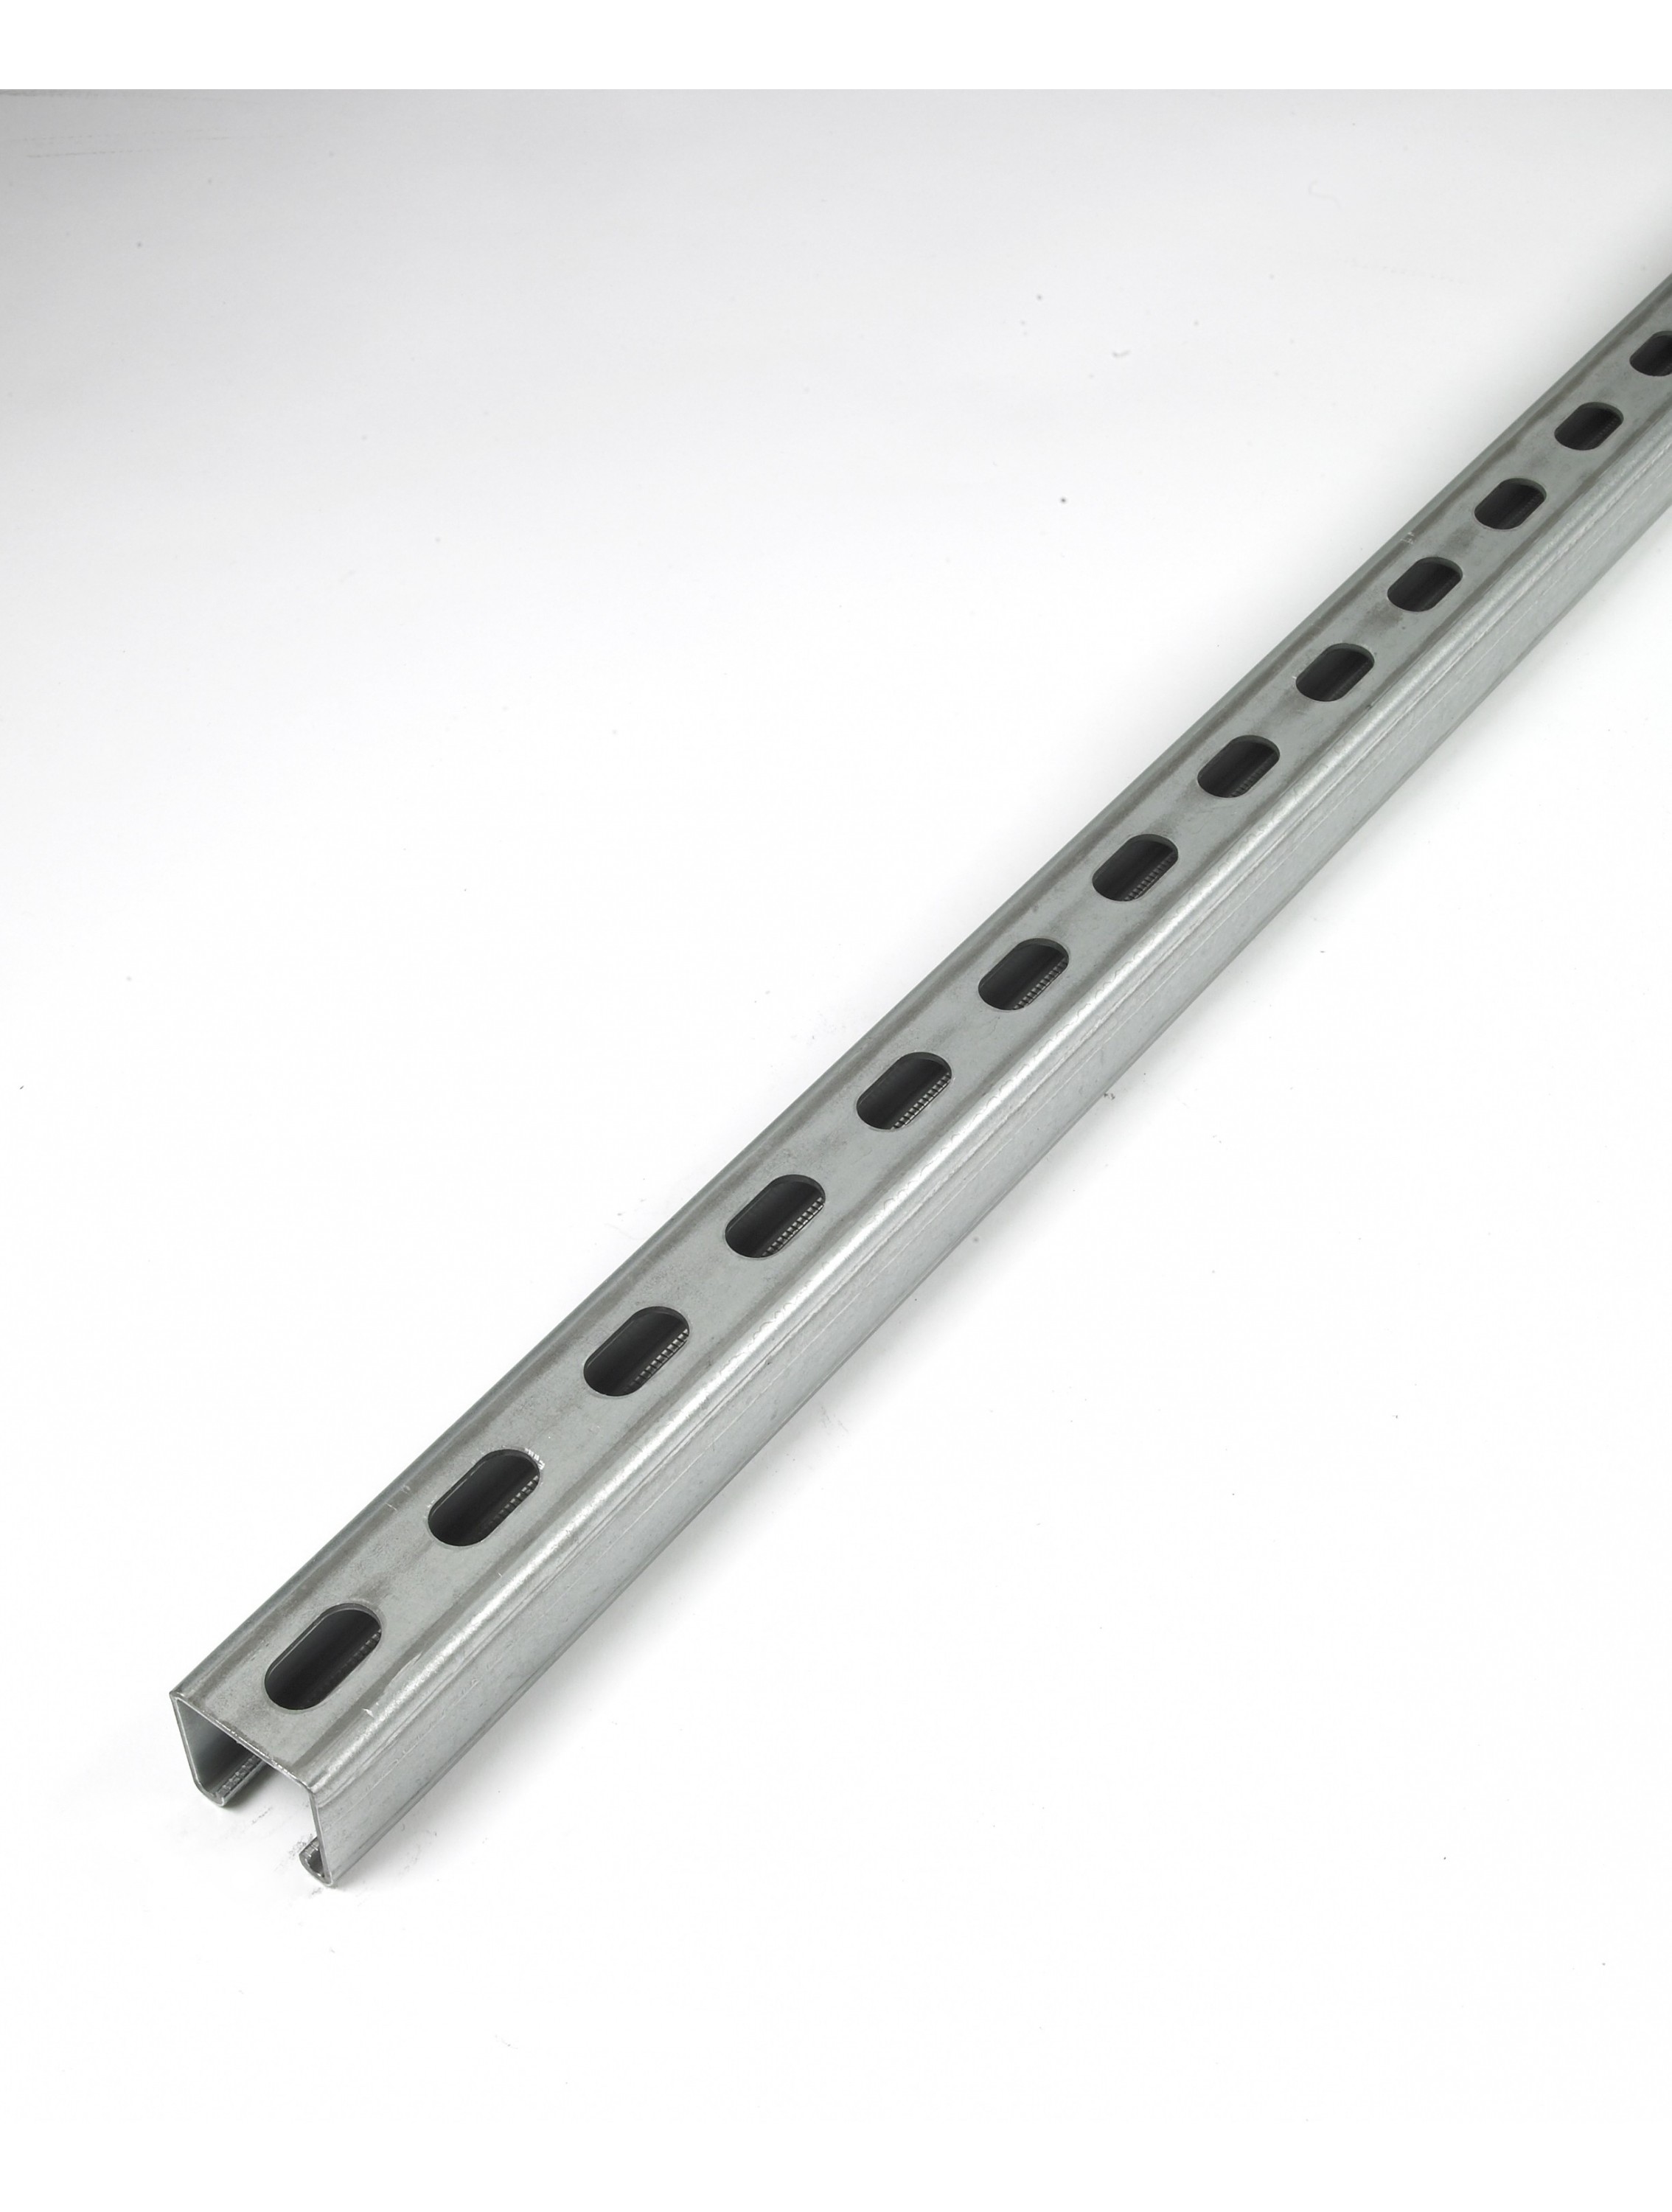 Unistrut 41x83 Slotted Hot Dip Galvanised Channel 6m (P5000TH) (P5000TX6H)